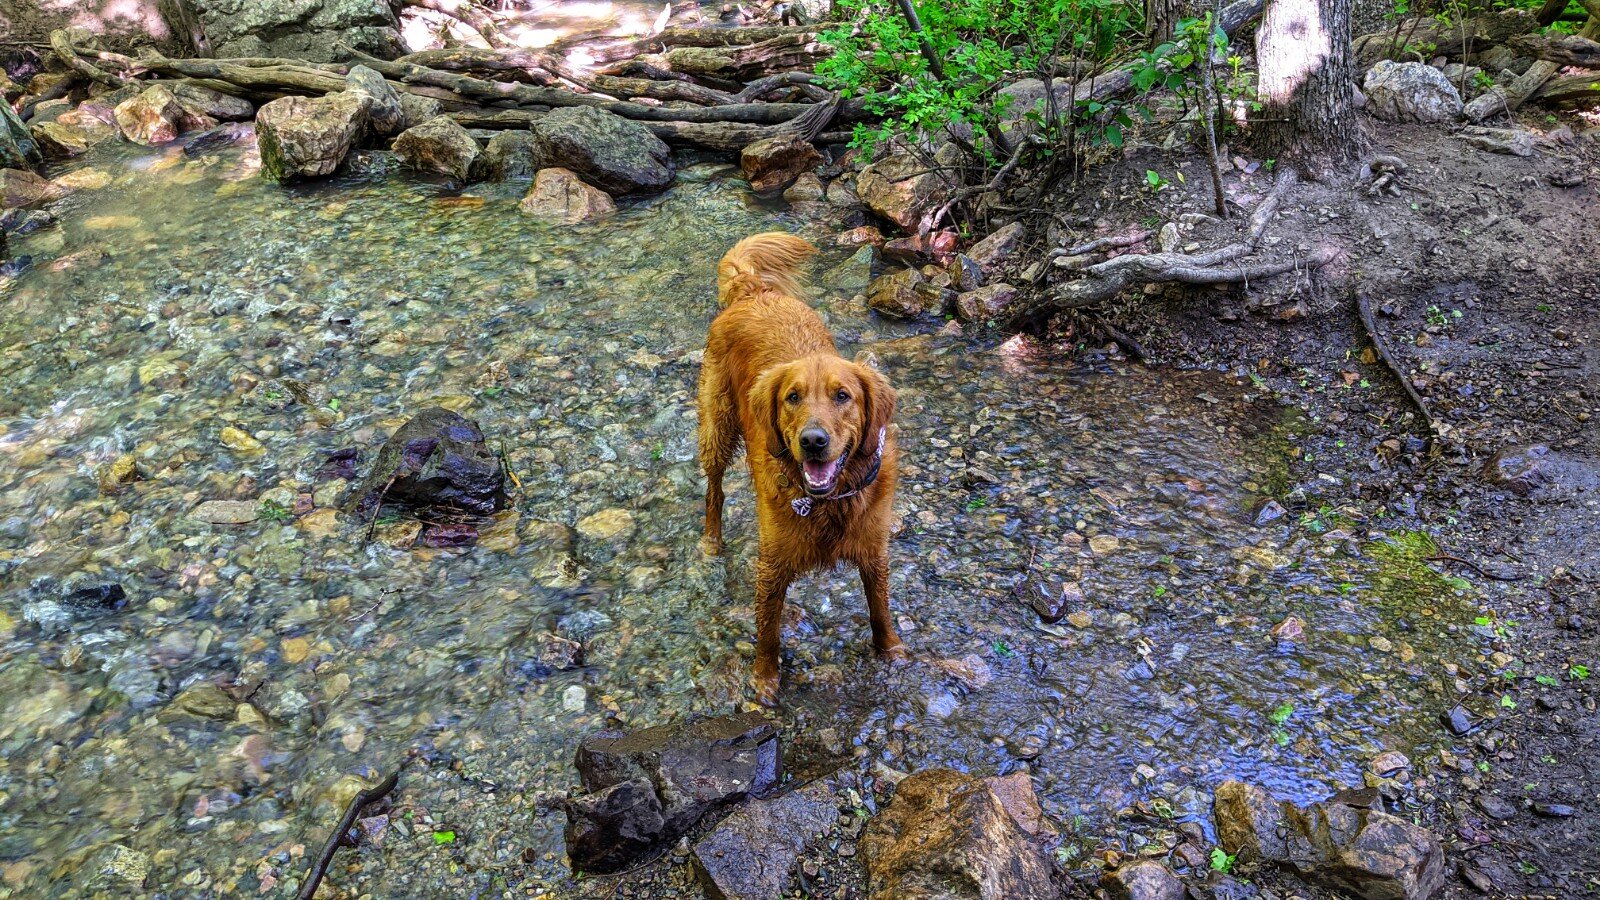 A golden retriever stands in a creek and looks up at the camera